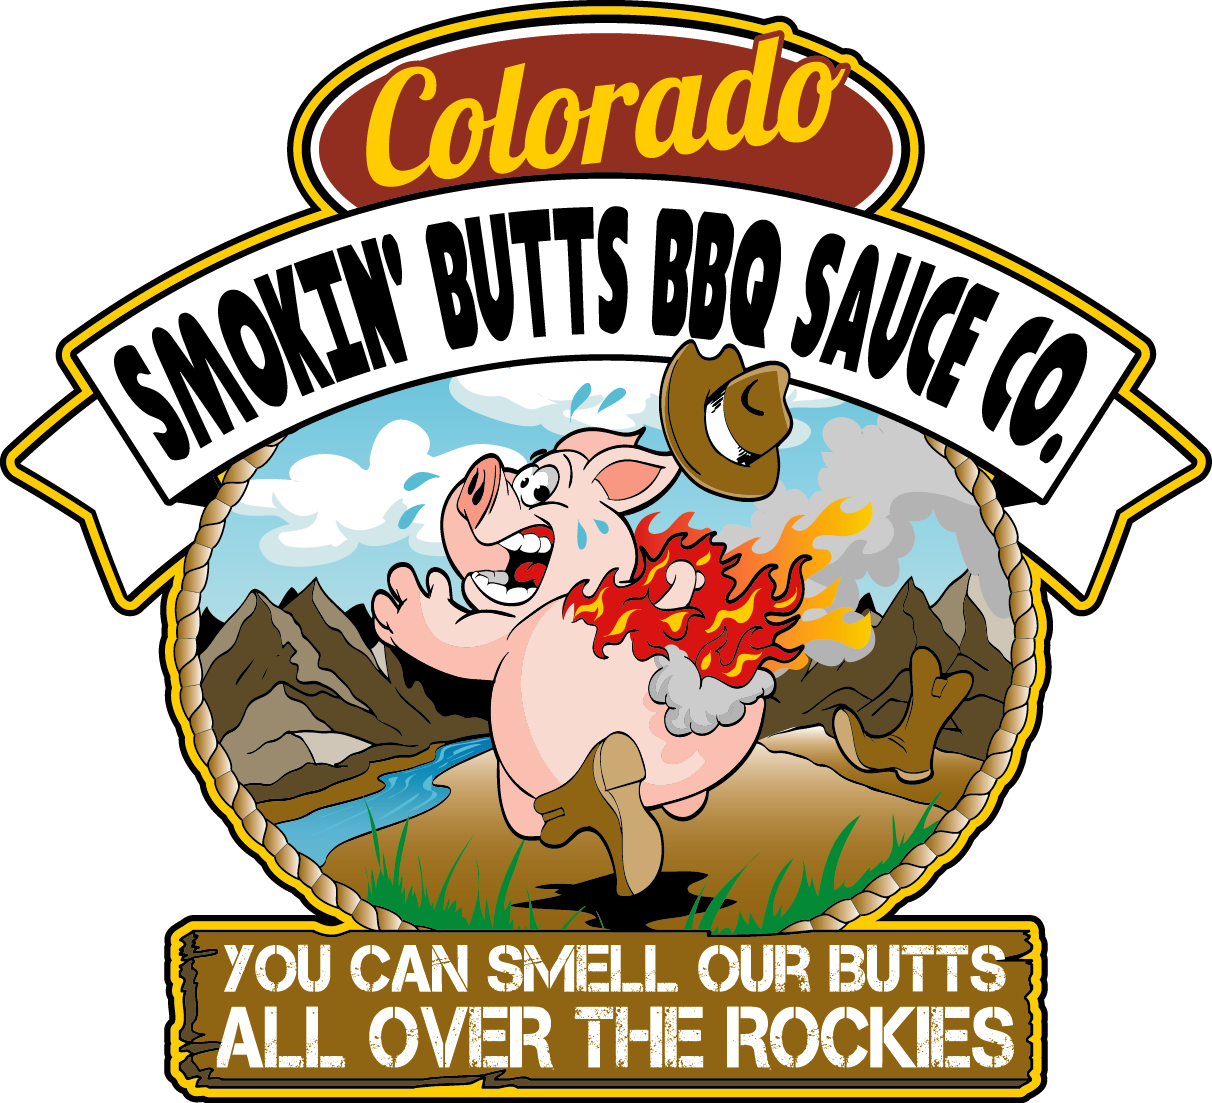 Colorado Smokin Butts Barbecue Sauce - Smokin Butts Barbecue Sauce (1212x1103), Png Download